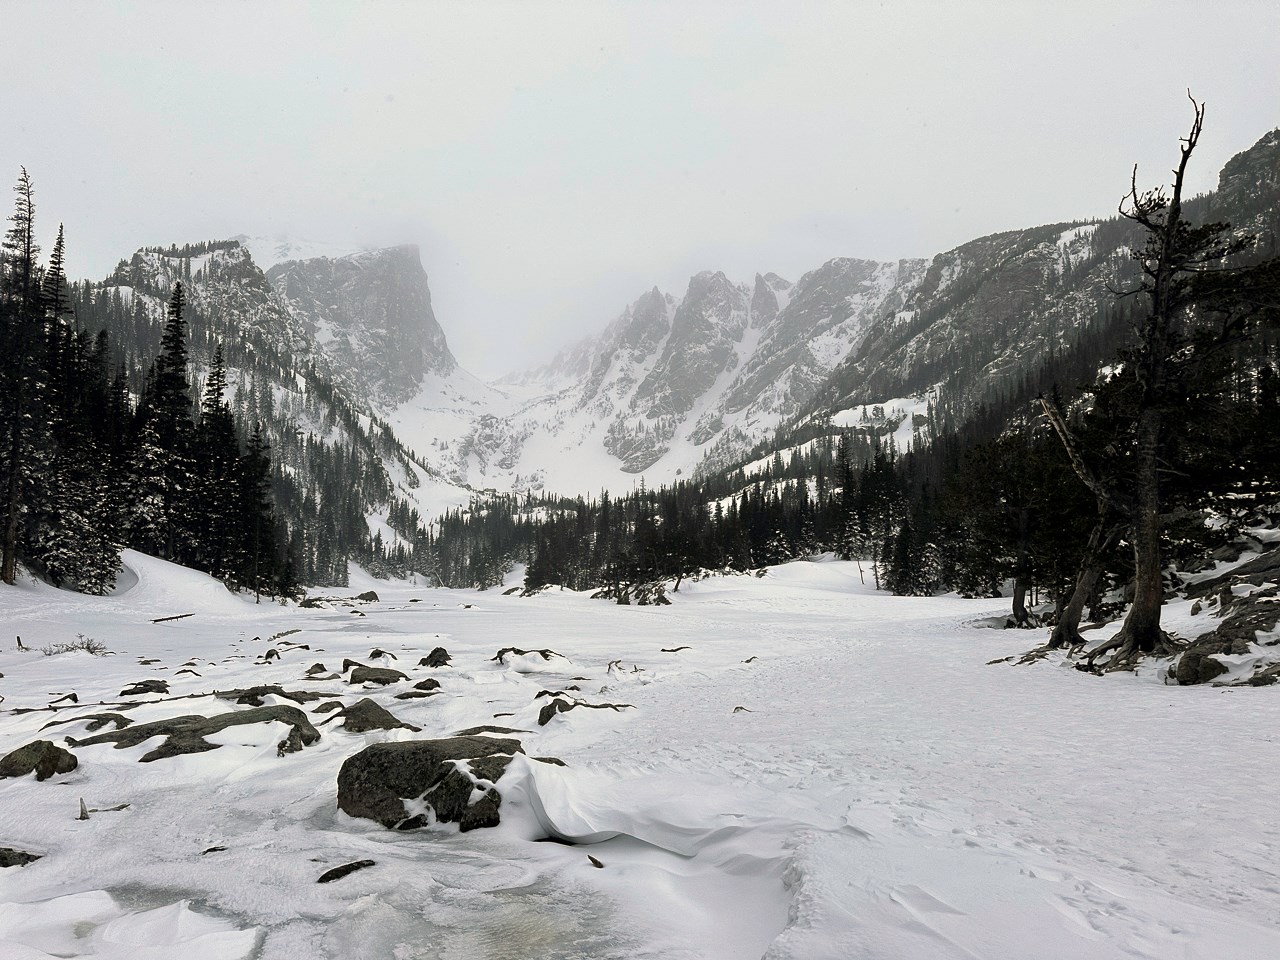 Very snowy mountains and snowy Dream Lake. Ice is melting on Dream Lake. NPS photo taken May 9, 2024